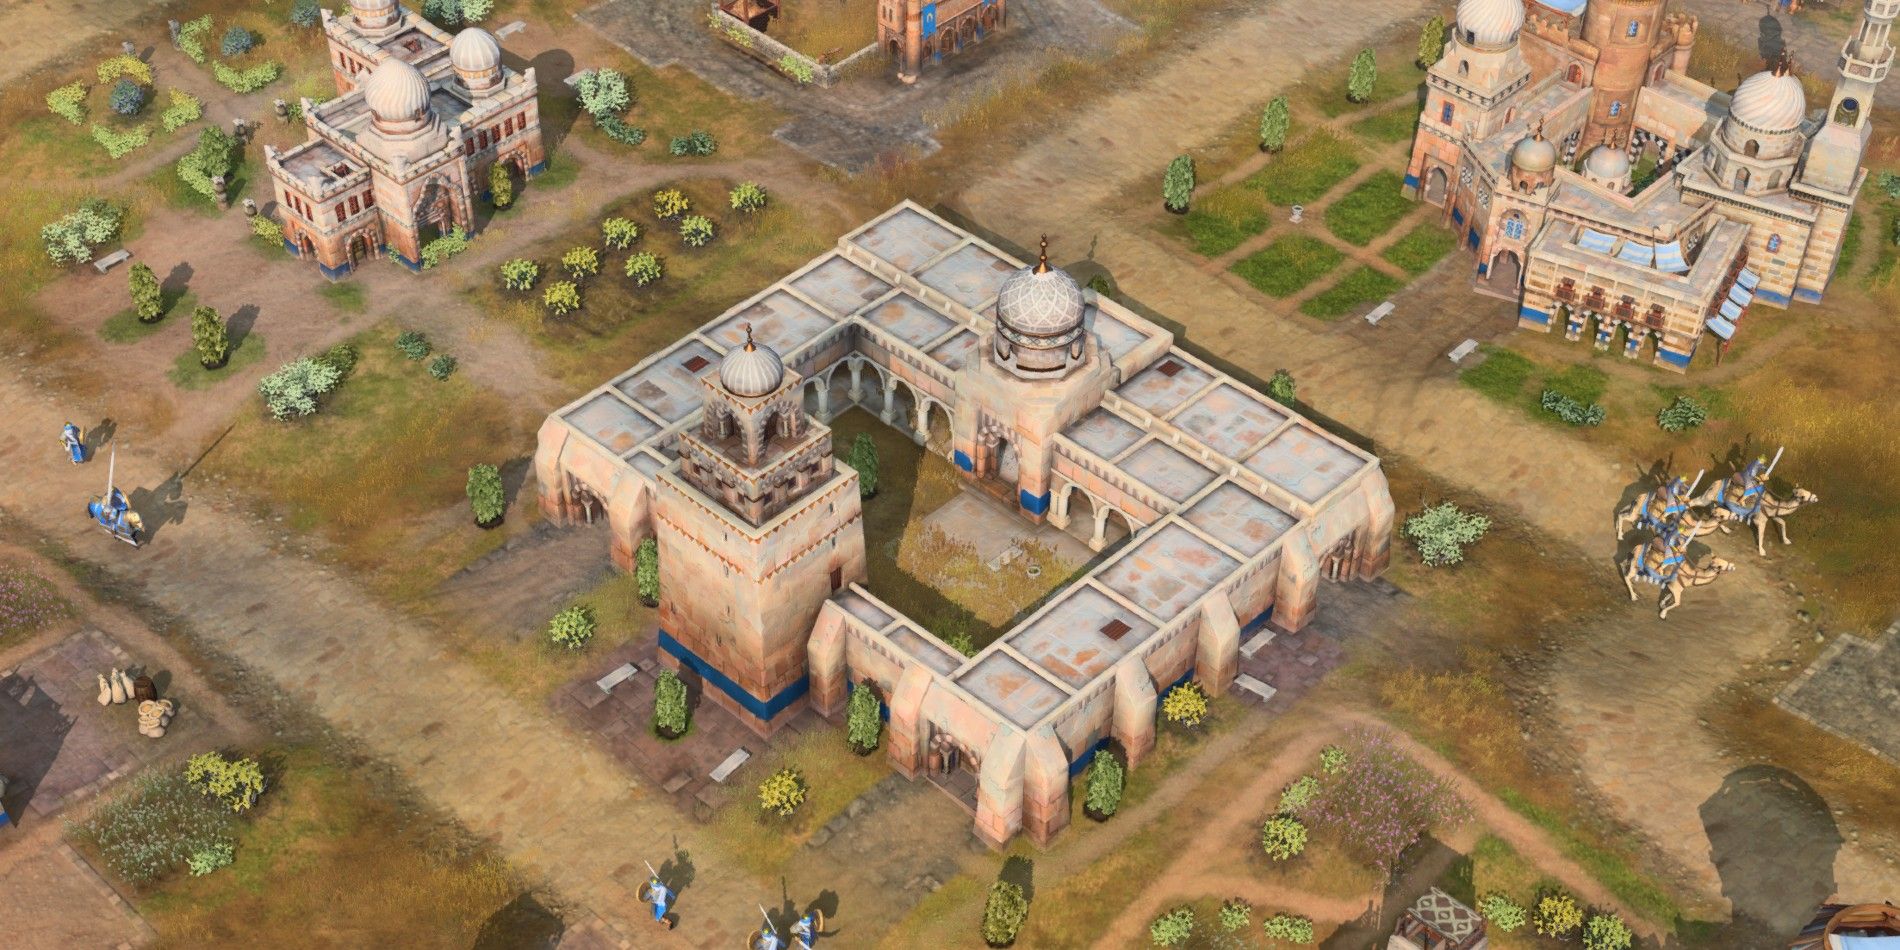 age of empires iv which civilizations